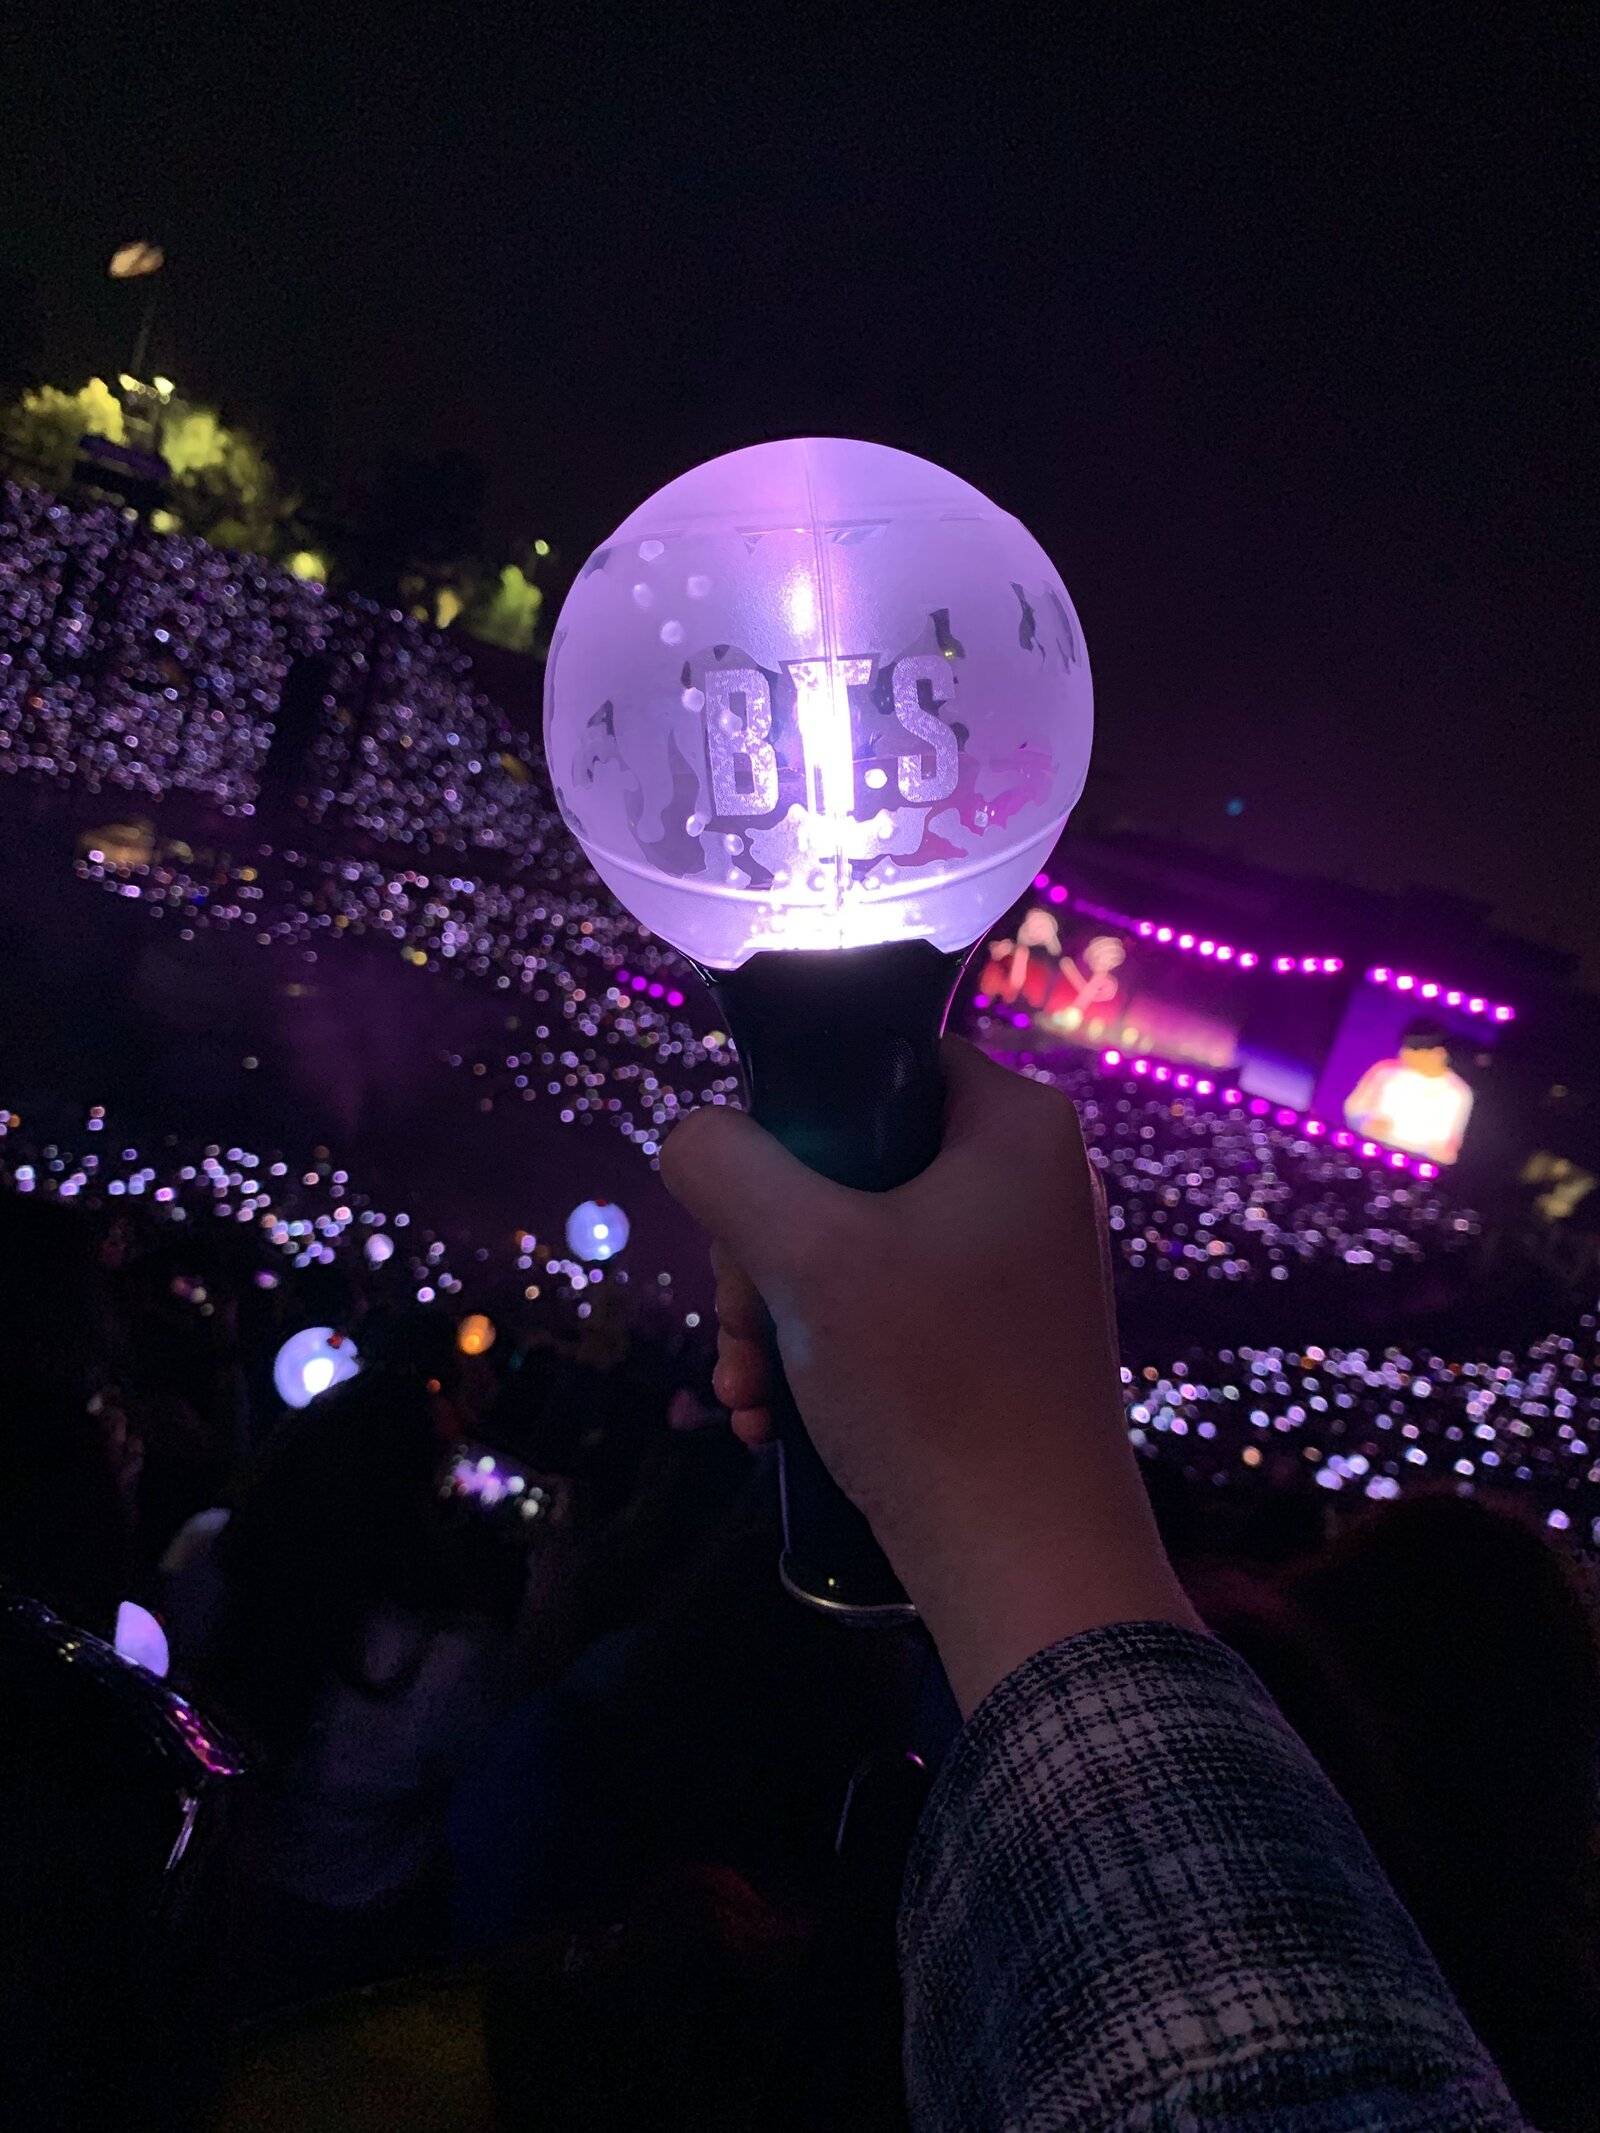 WTF is a BTS ARMY Bomb? Inside the exclusive band